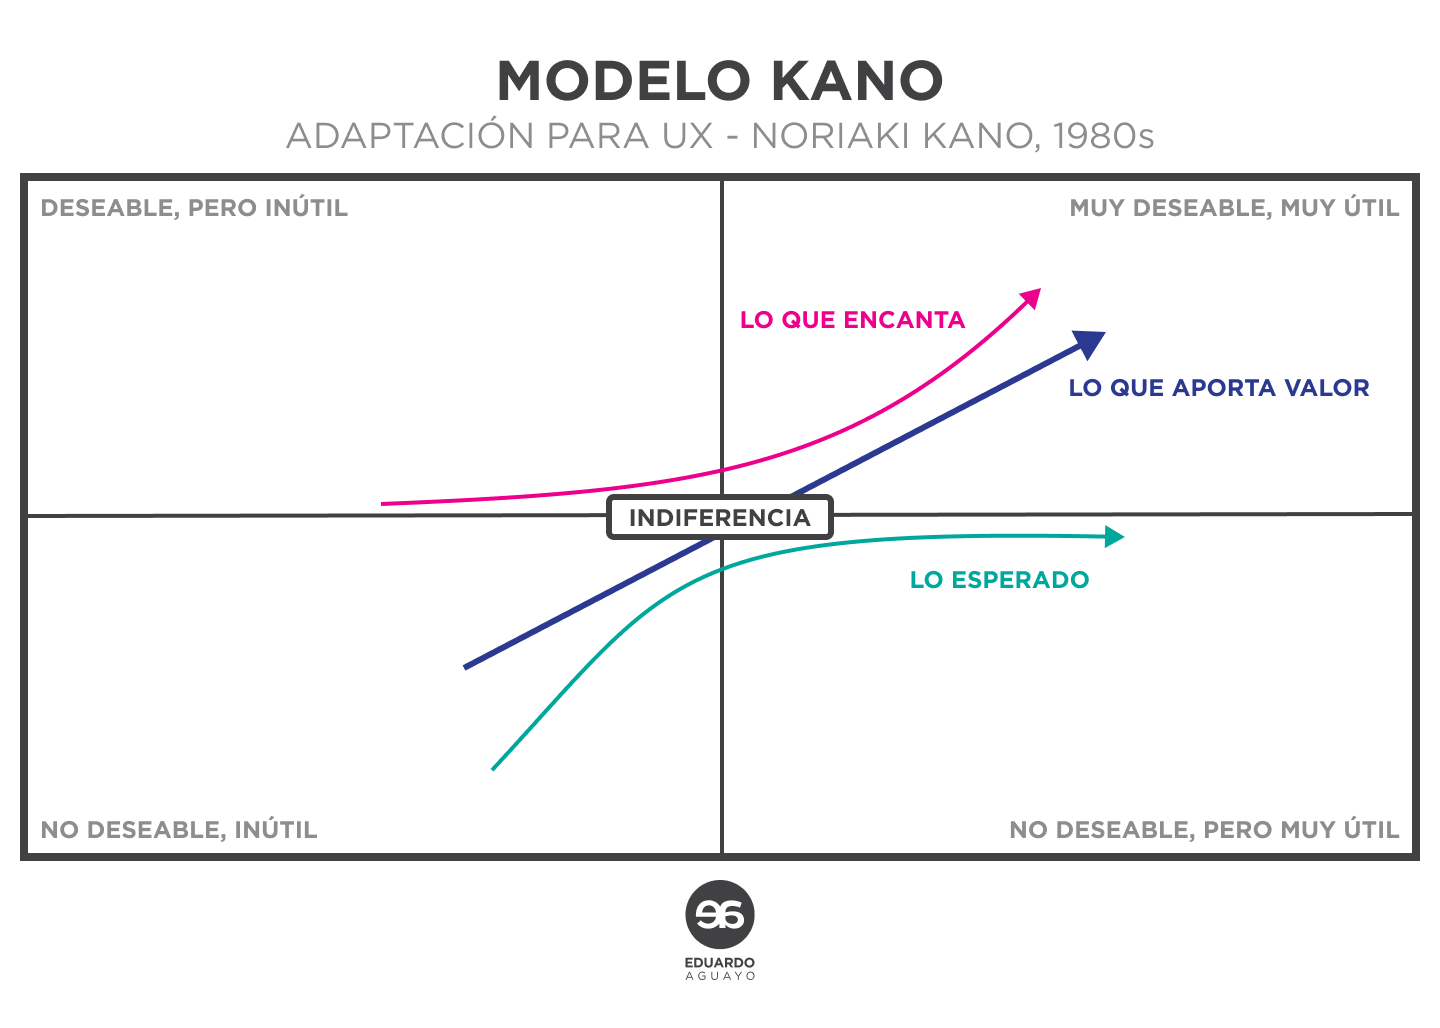 Modelo Kano, design research, ux research, product design